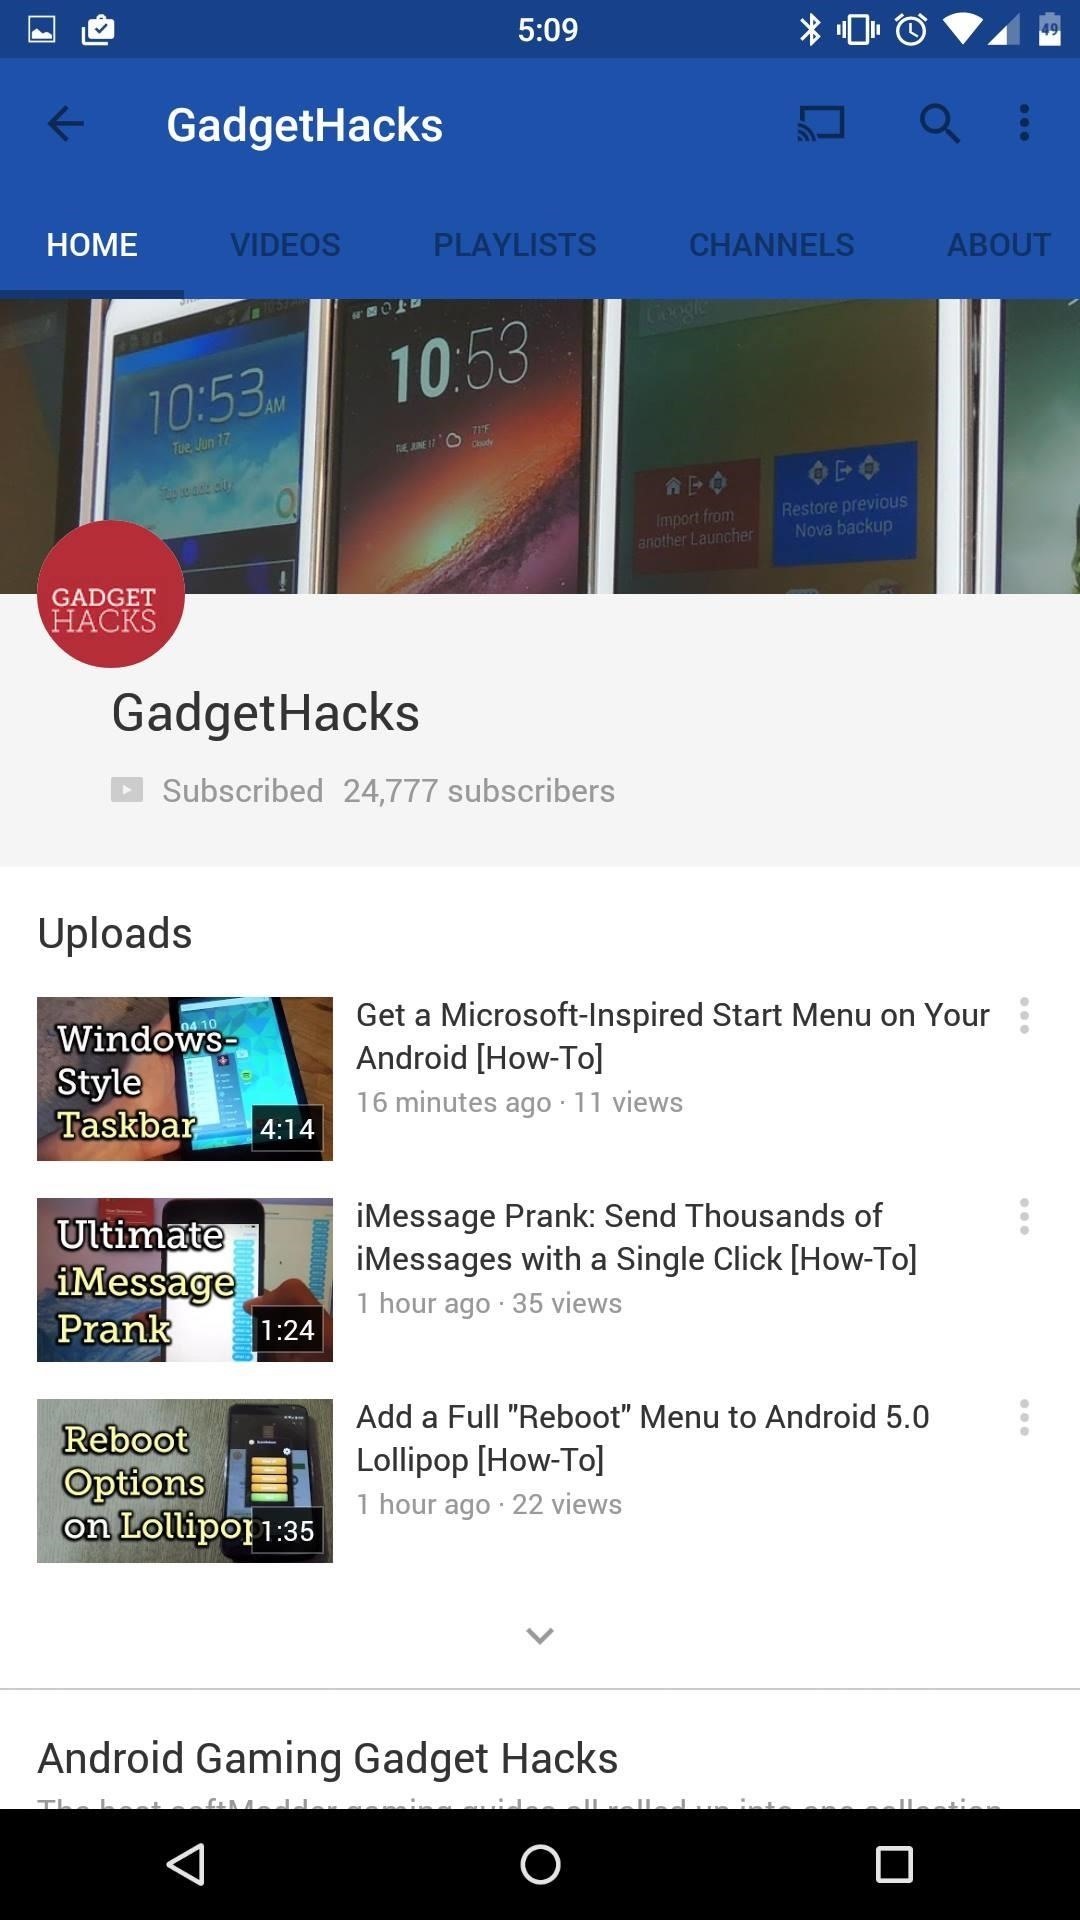 YouTube Finally Receives Its Material Design Makeover (APK Inside)